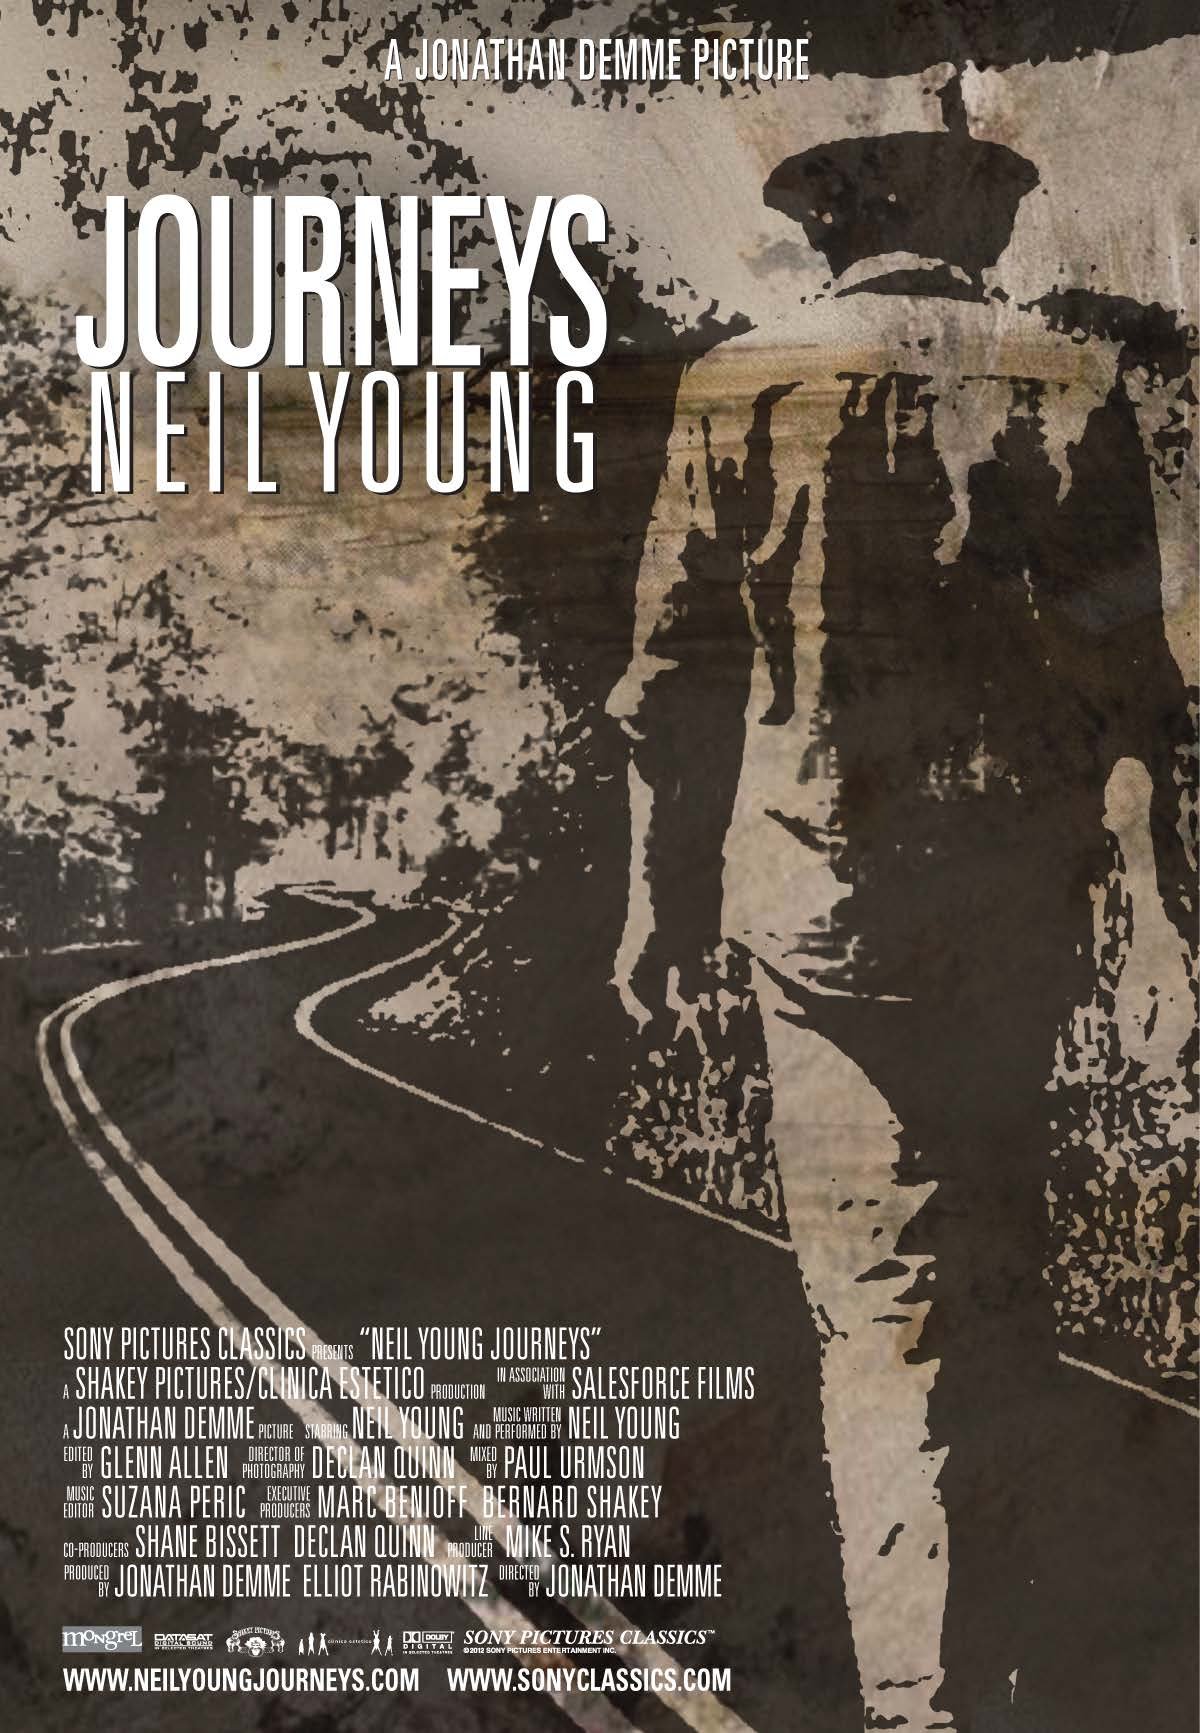 Poster of the movie Neil Young Journeys